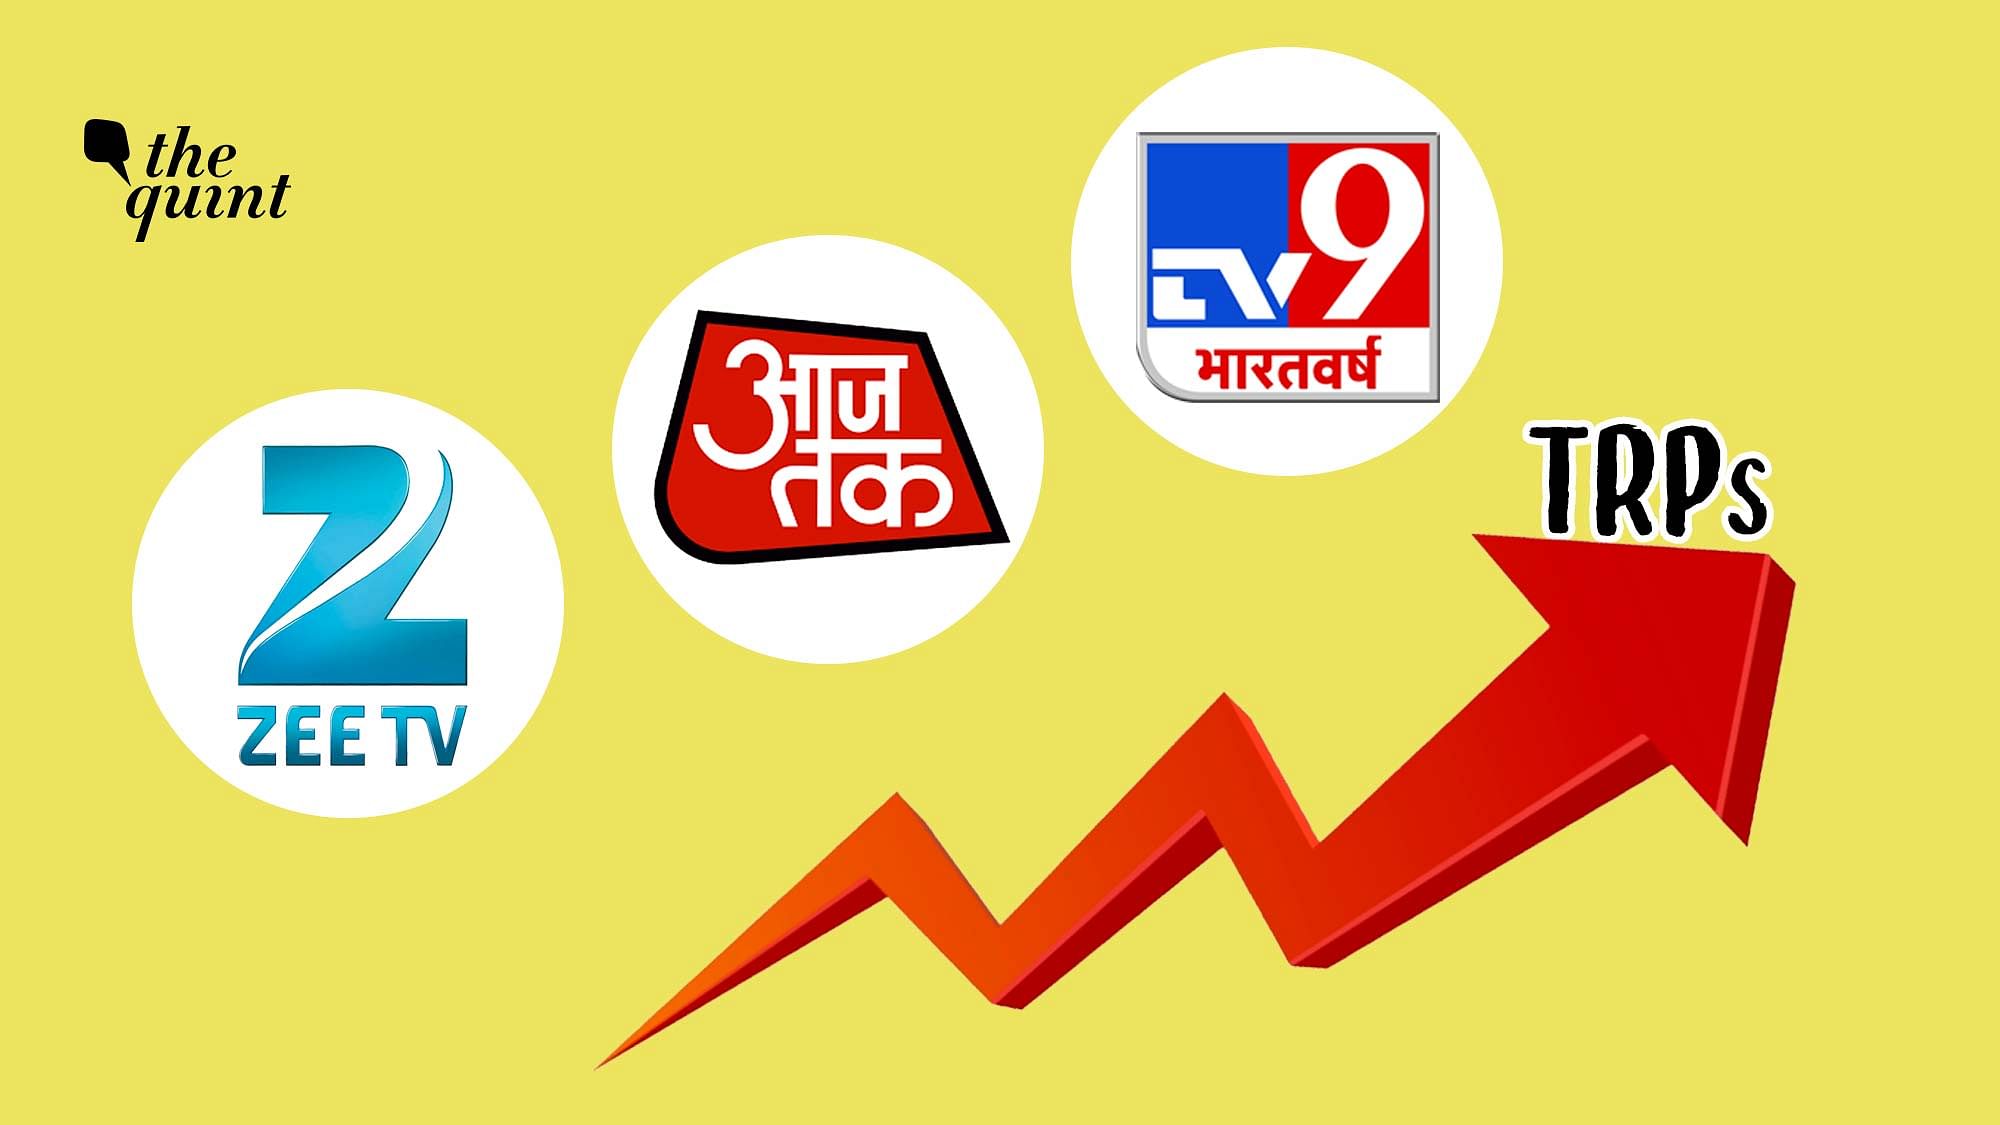 News channels are high on TRPs.